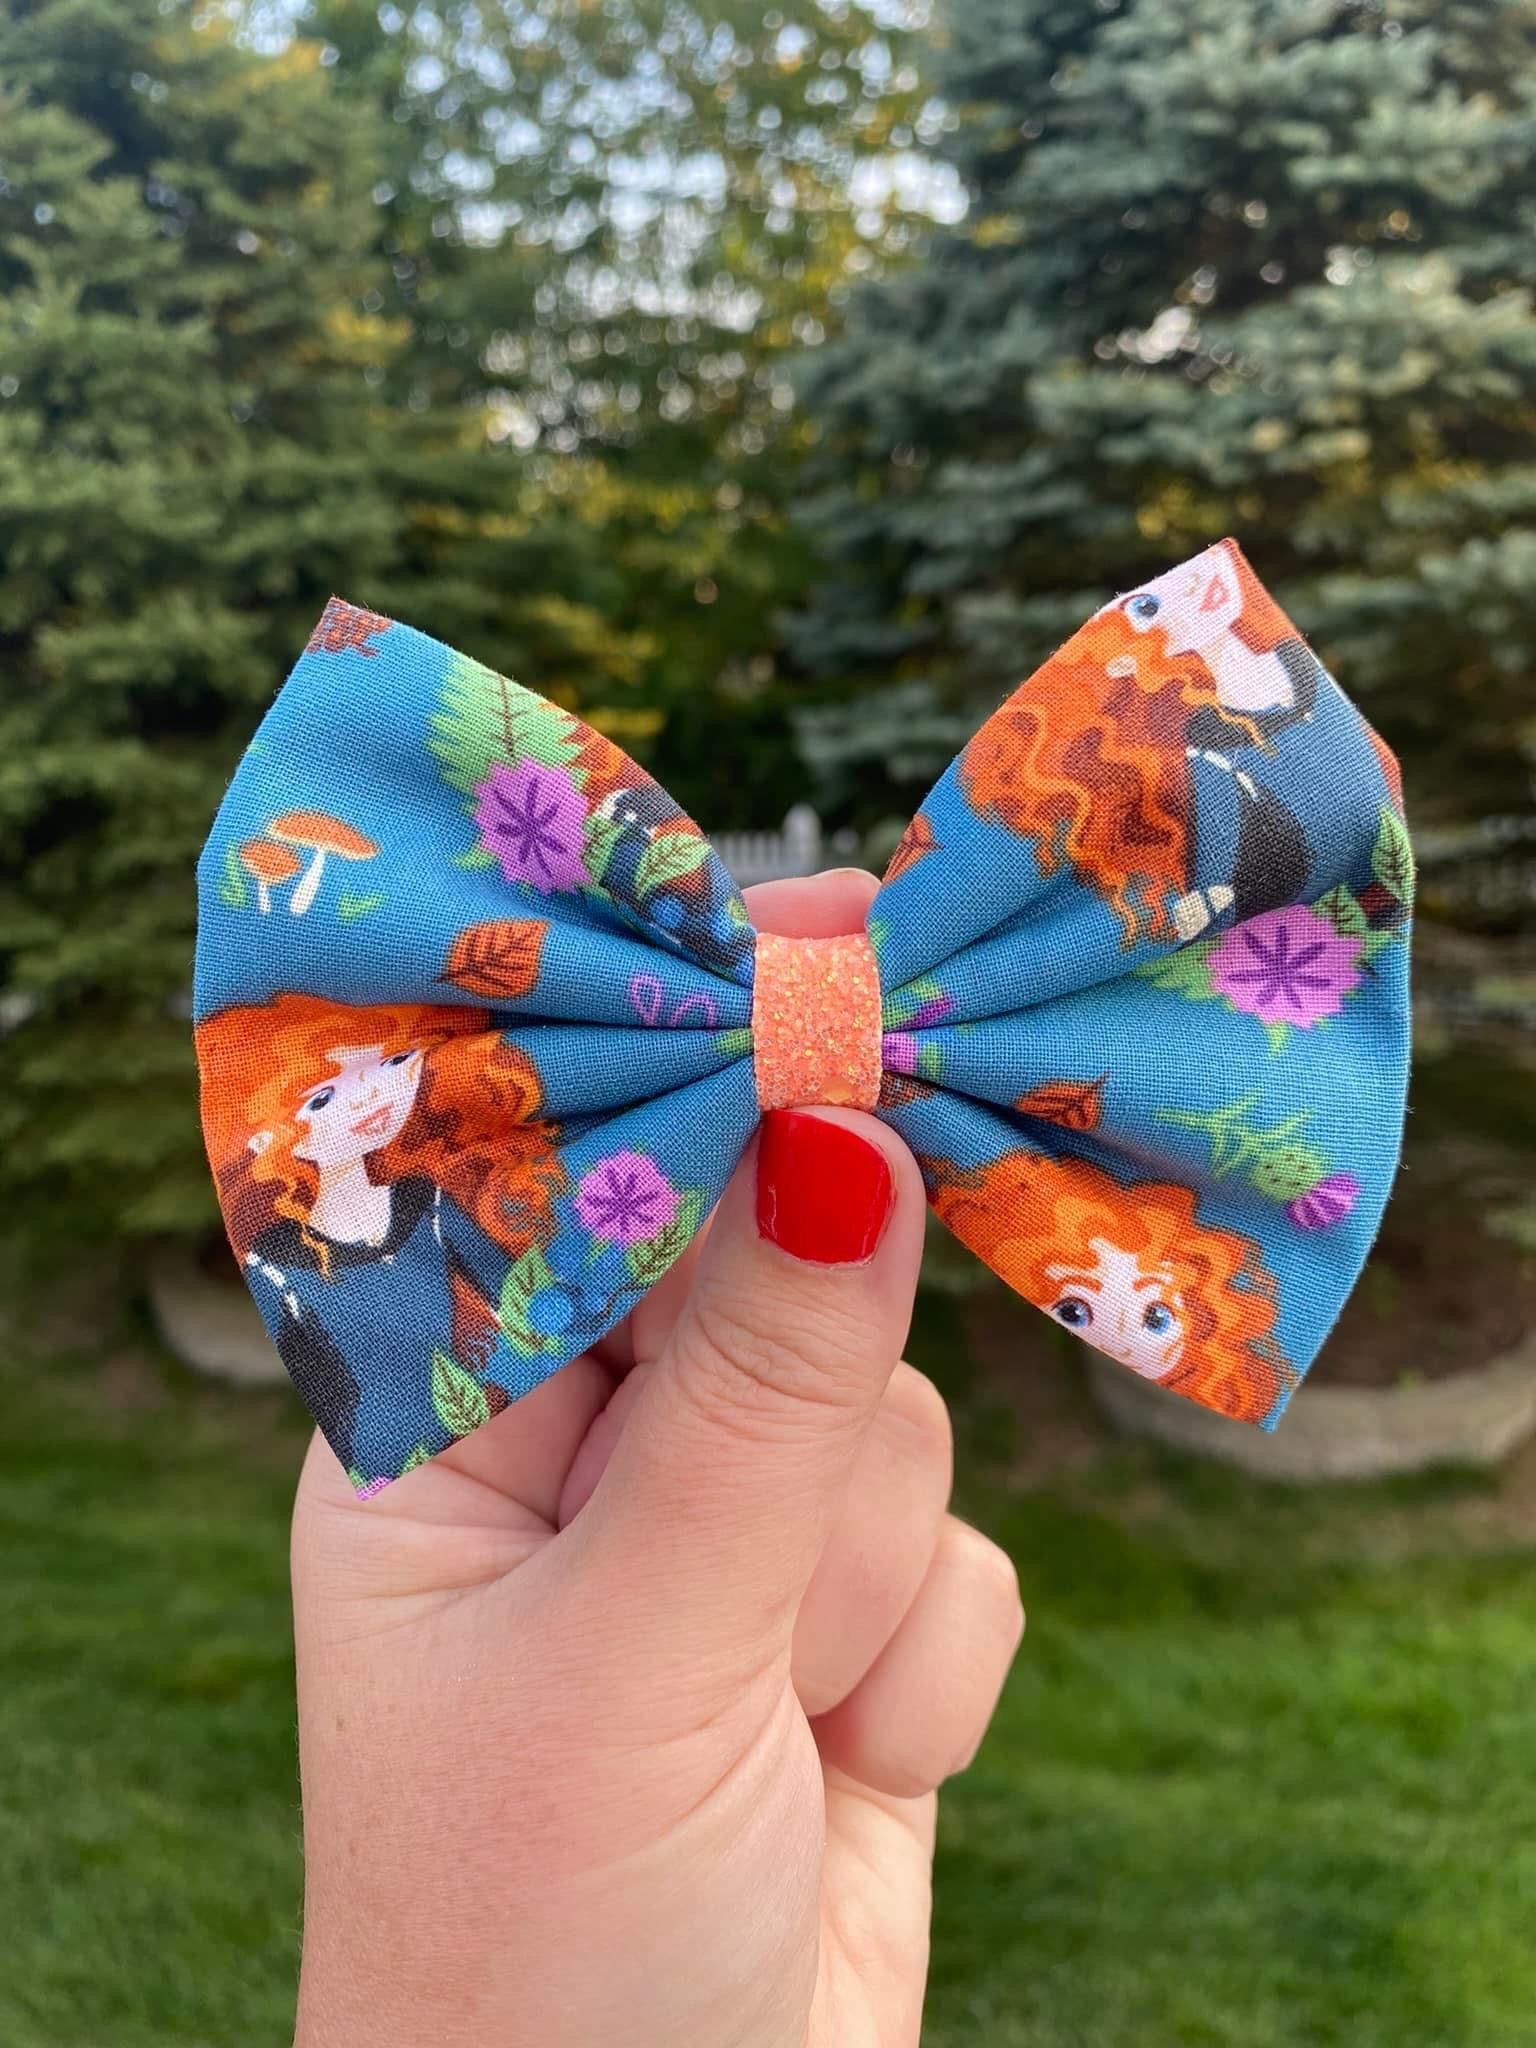 Be Brave, oversized bows